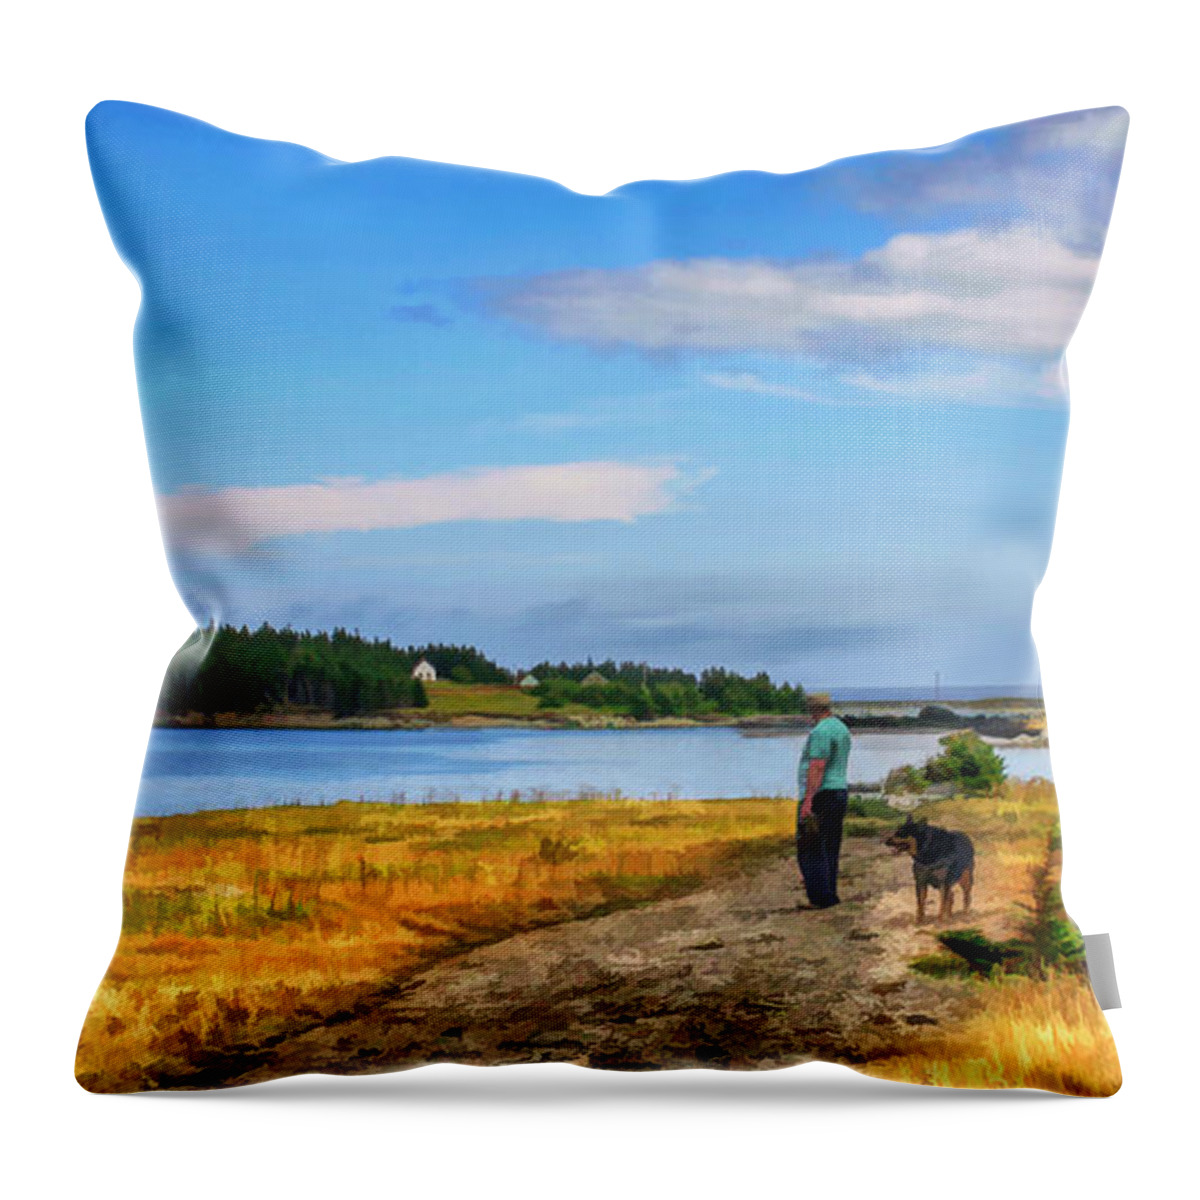 Seaside Throw Pillow featuring the photograph Seaside Road by Tatiana Travelways